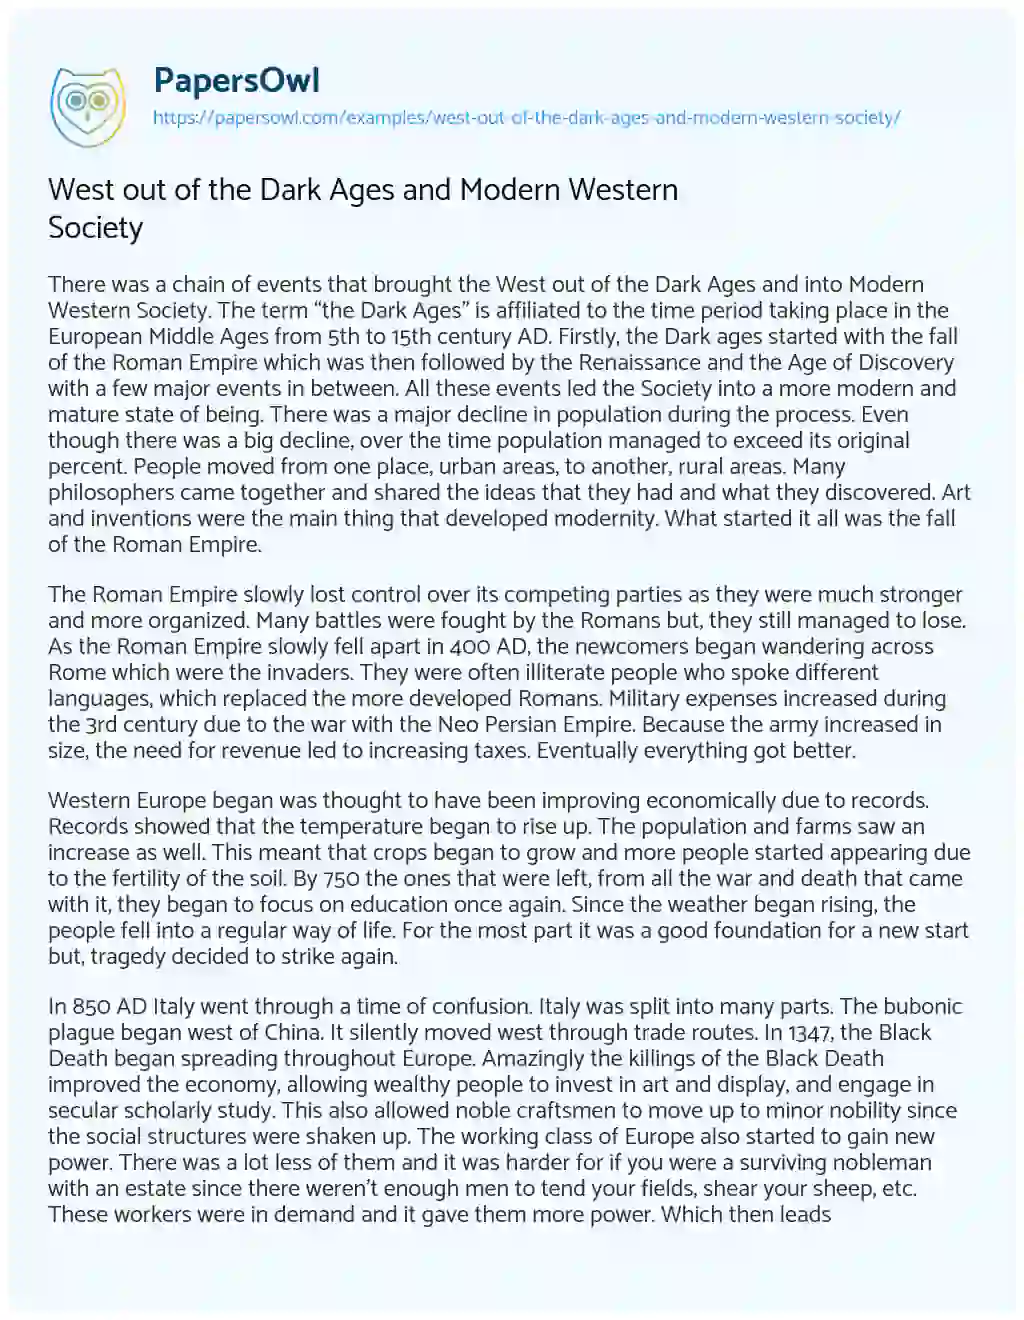 Essay on West out of the Dark Ages and Modern Western Society